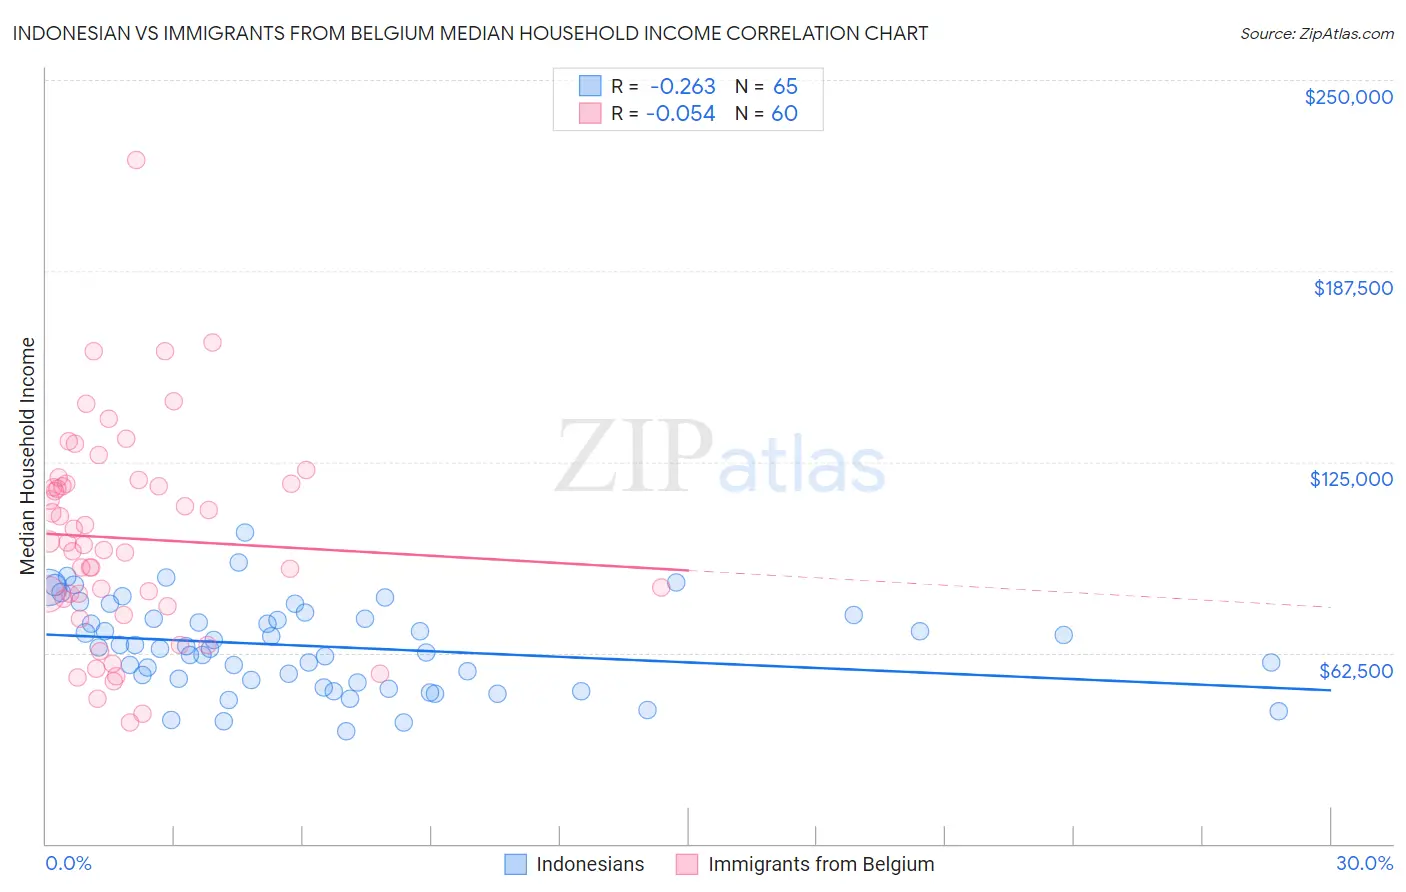 Indonesian vs Immigrants from Belgium Median Household Income